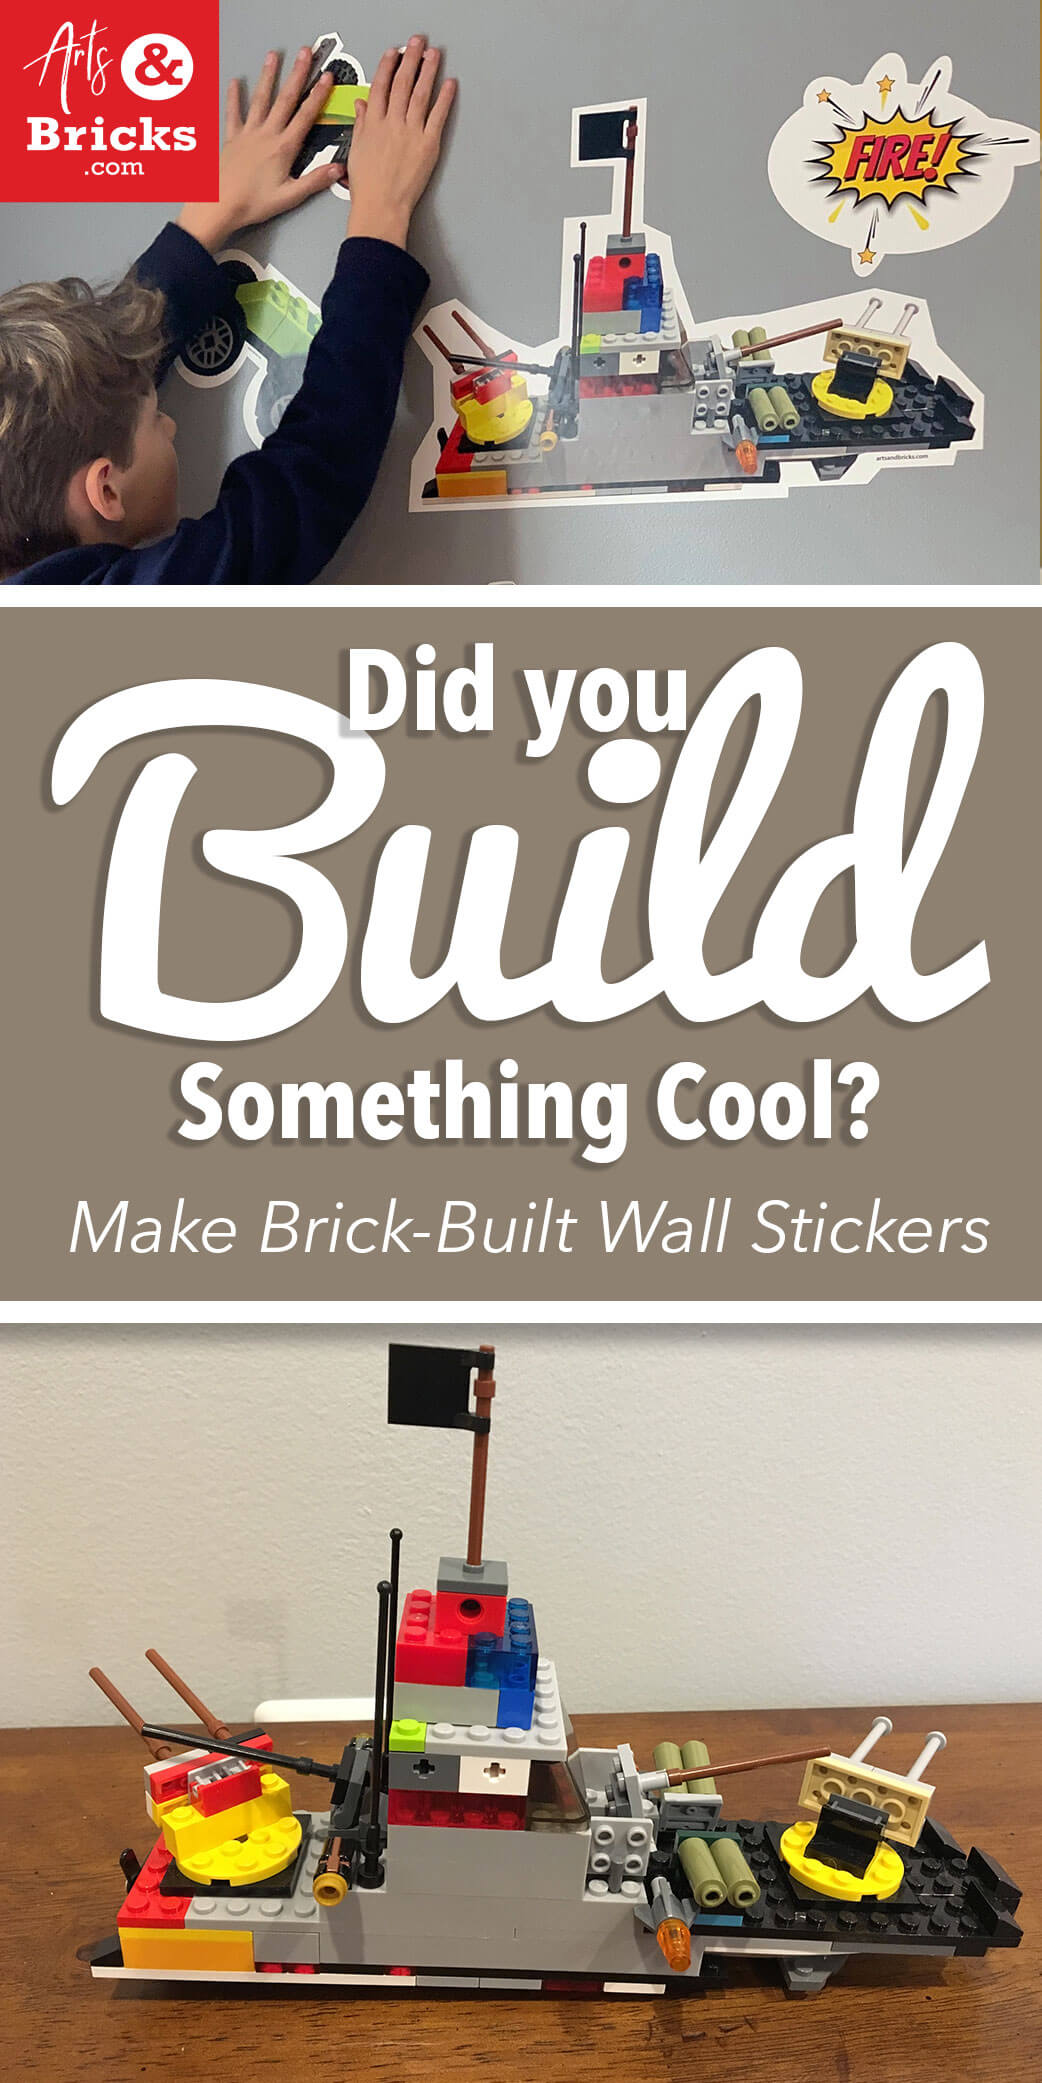 Did you build something cool with LEGO bricks? Turn them into kids wall decor with Arts and Bricks's design-it-yourself brick-built wall stickers.